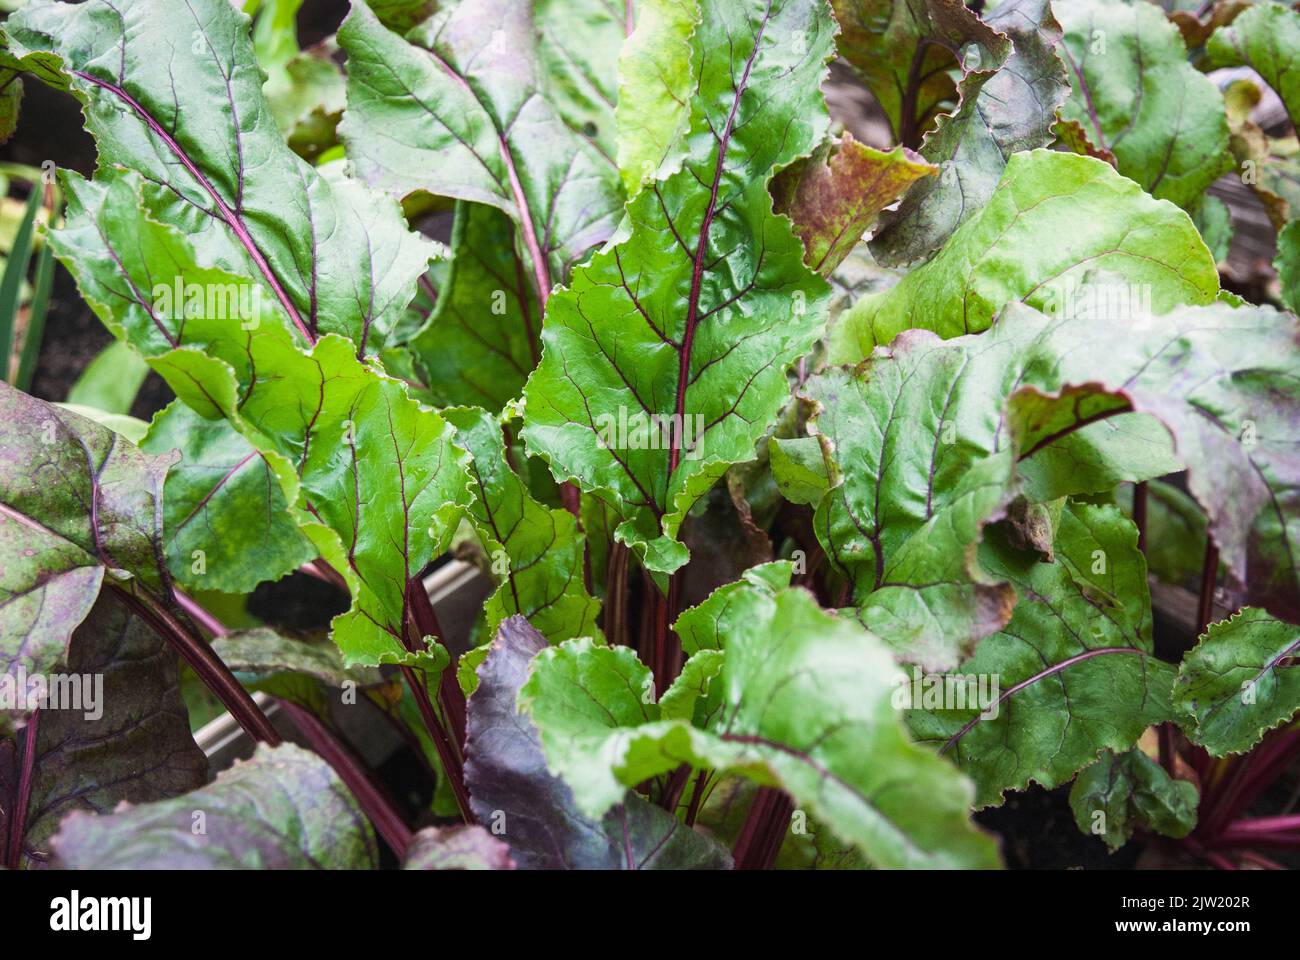 Beetroot greens grown in the garden bed Stock Photo